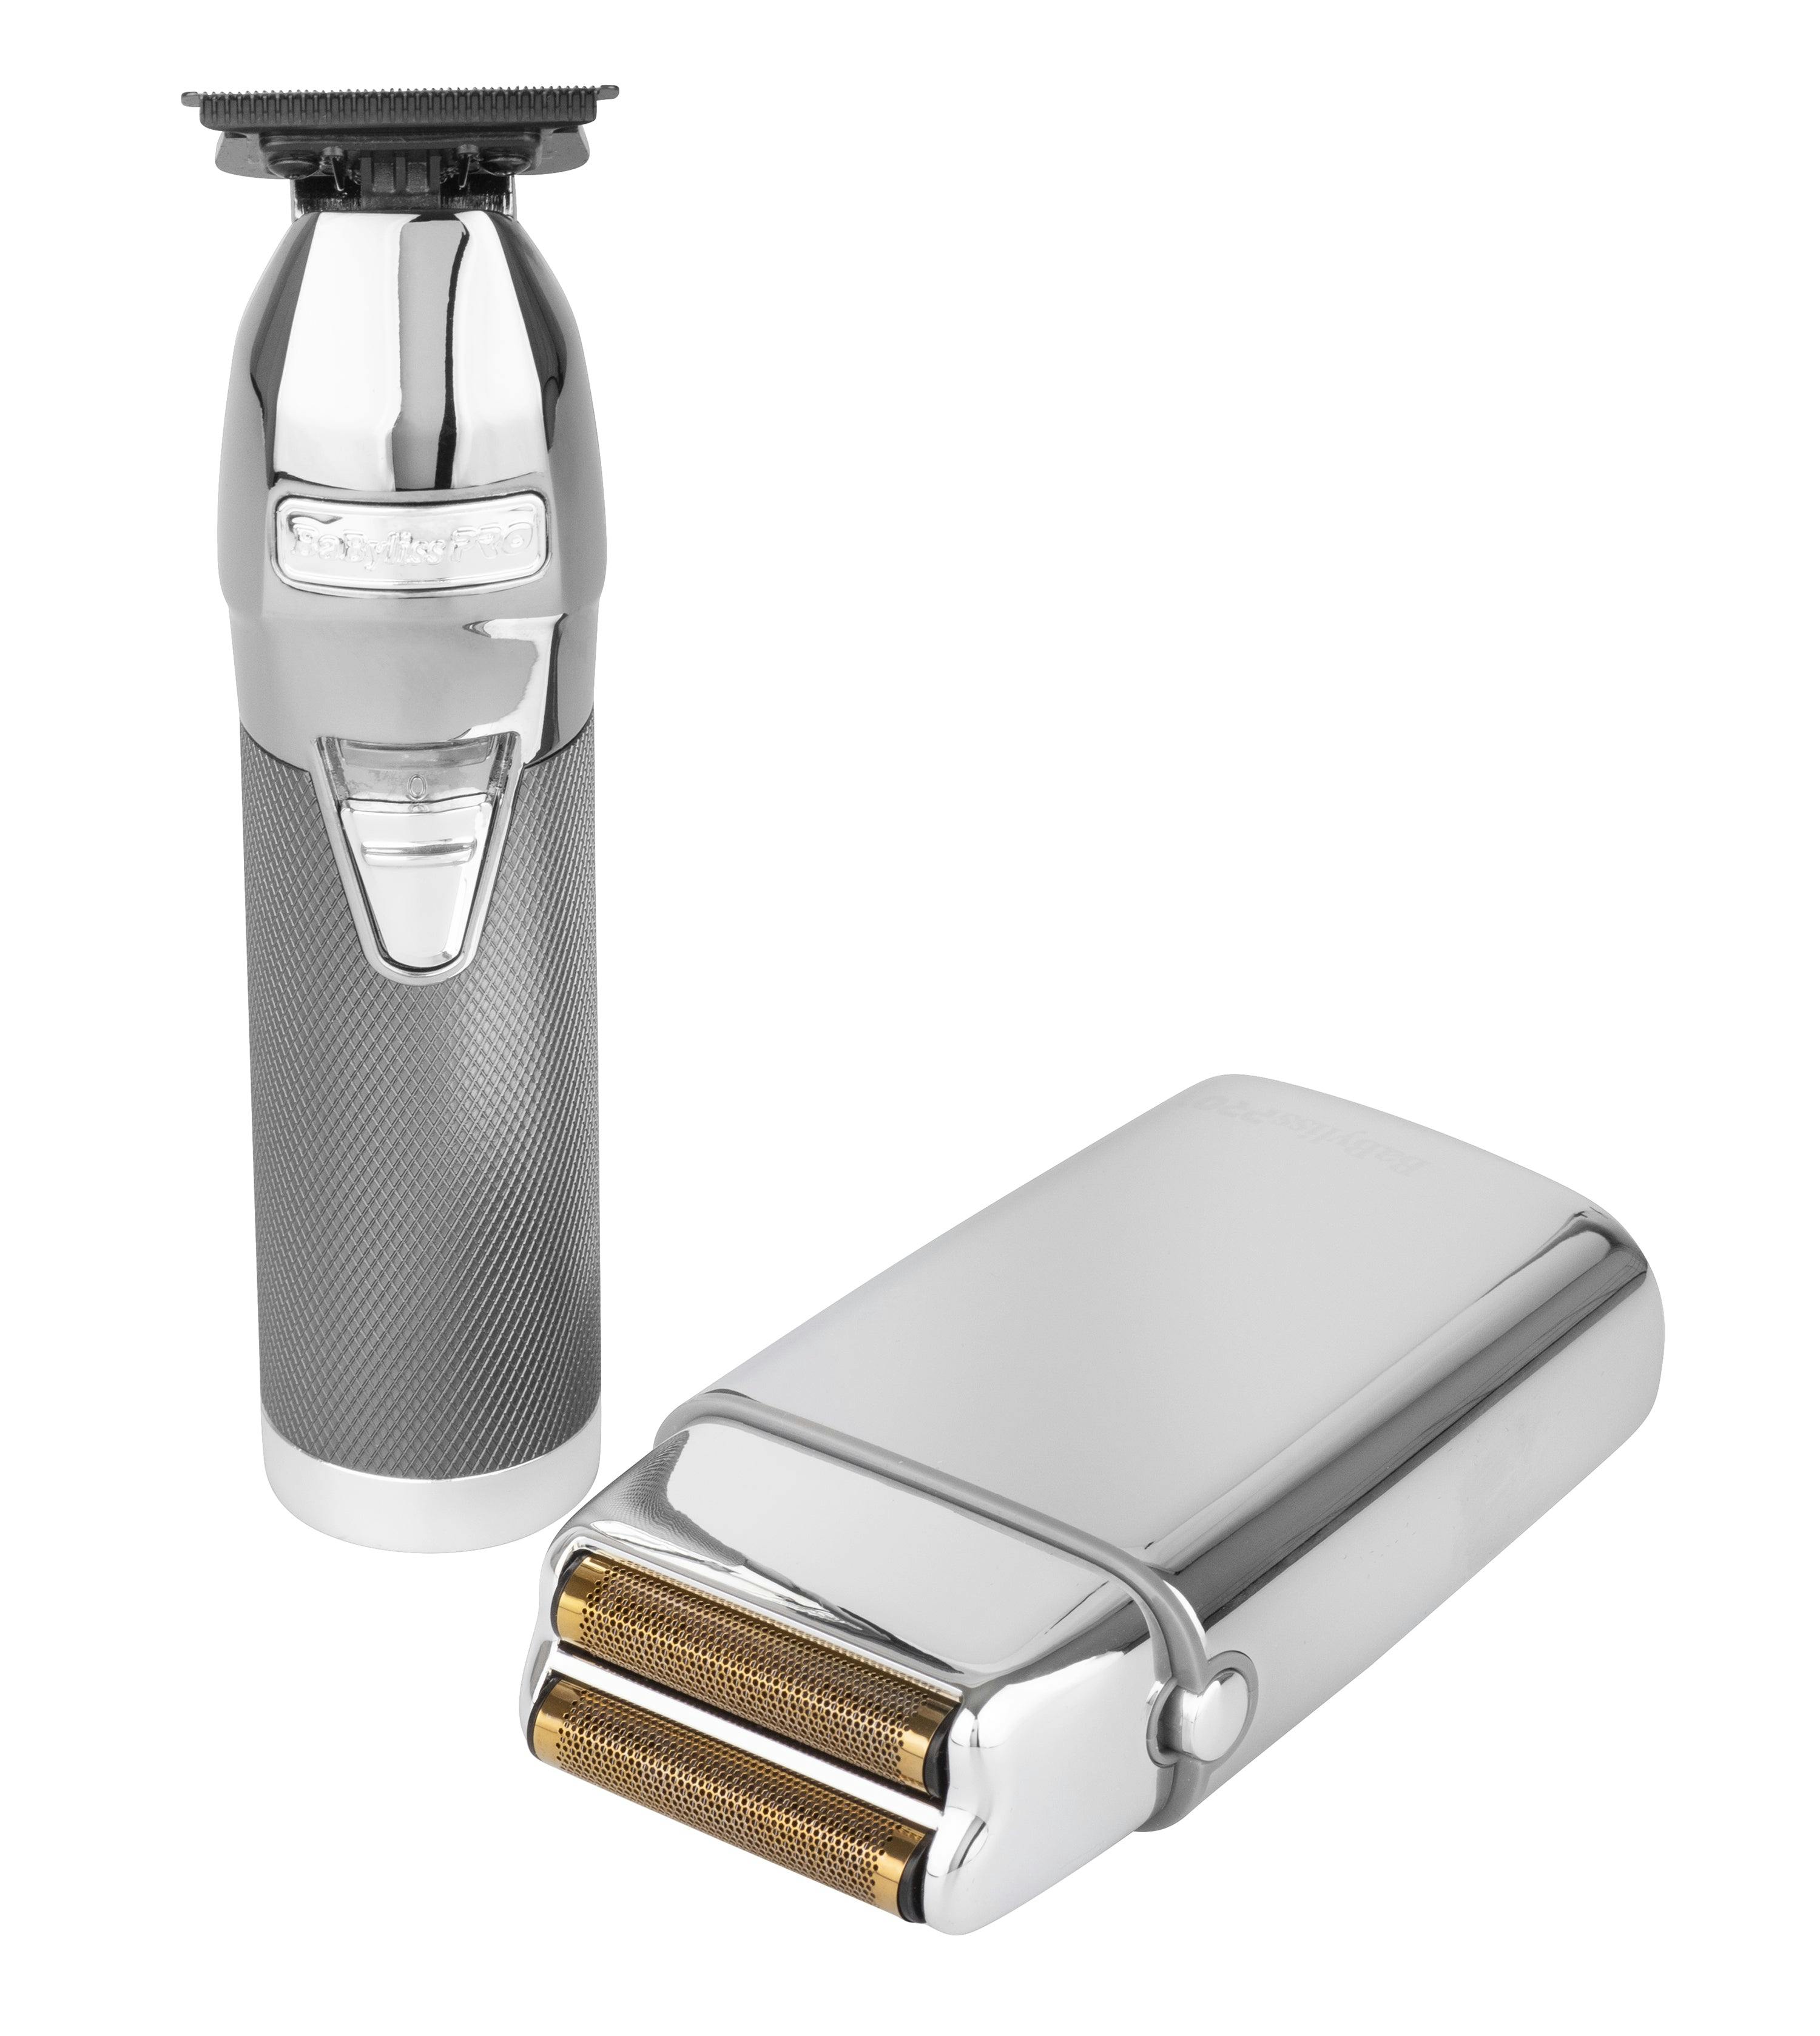 BaBylissPRO Duo Silver Double Foil Shaver and Outliner Trimmer